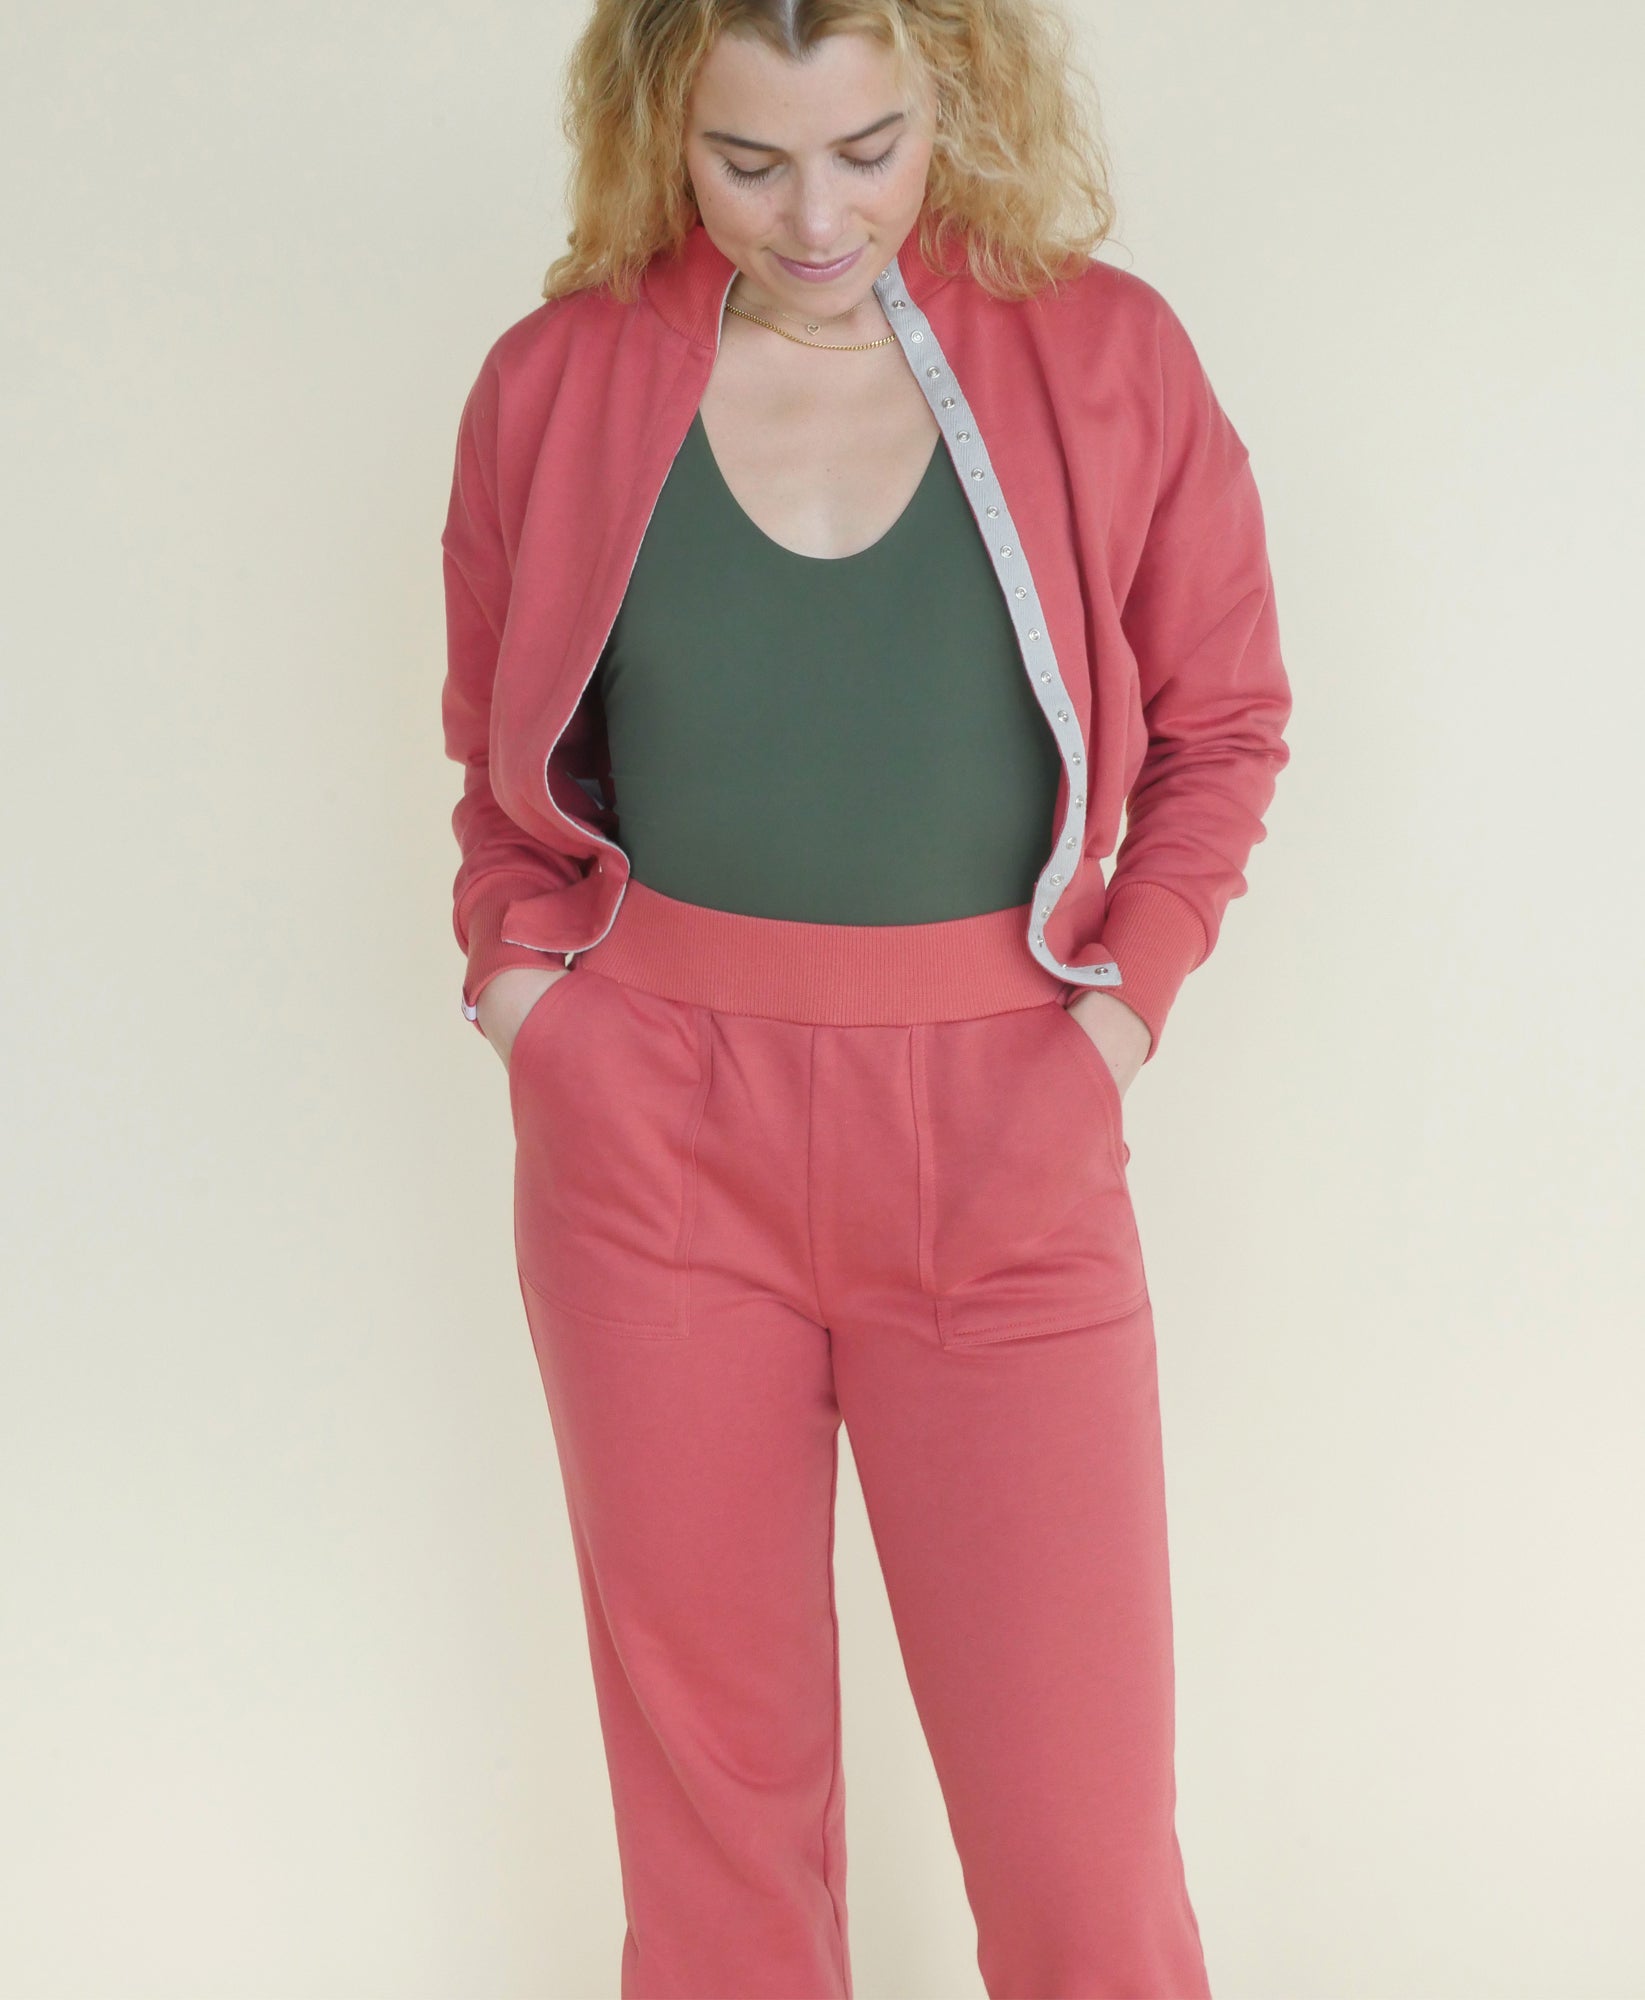 Slashleg Sweatpants in Sepia Pink With Wide Leg Silhouette – Wear One's At